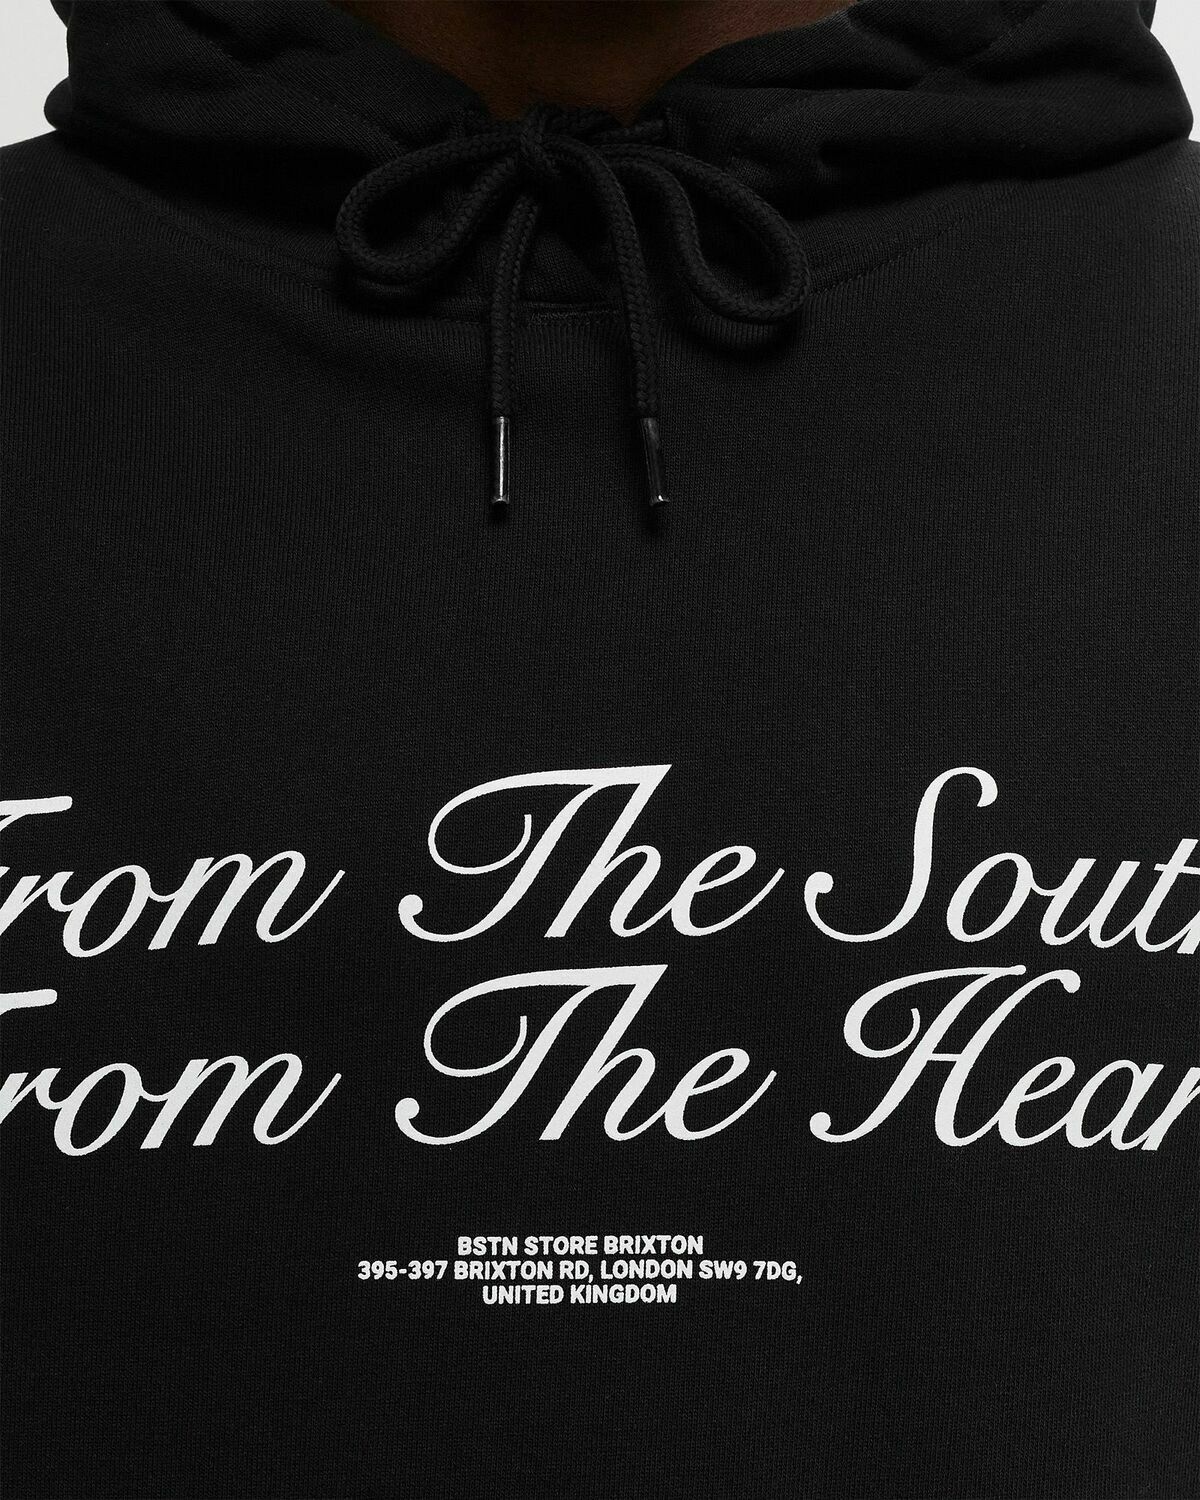 Bstn Brand From The South From The Heart Hoody Black - Mens - Hoodies